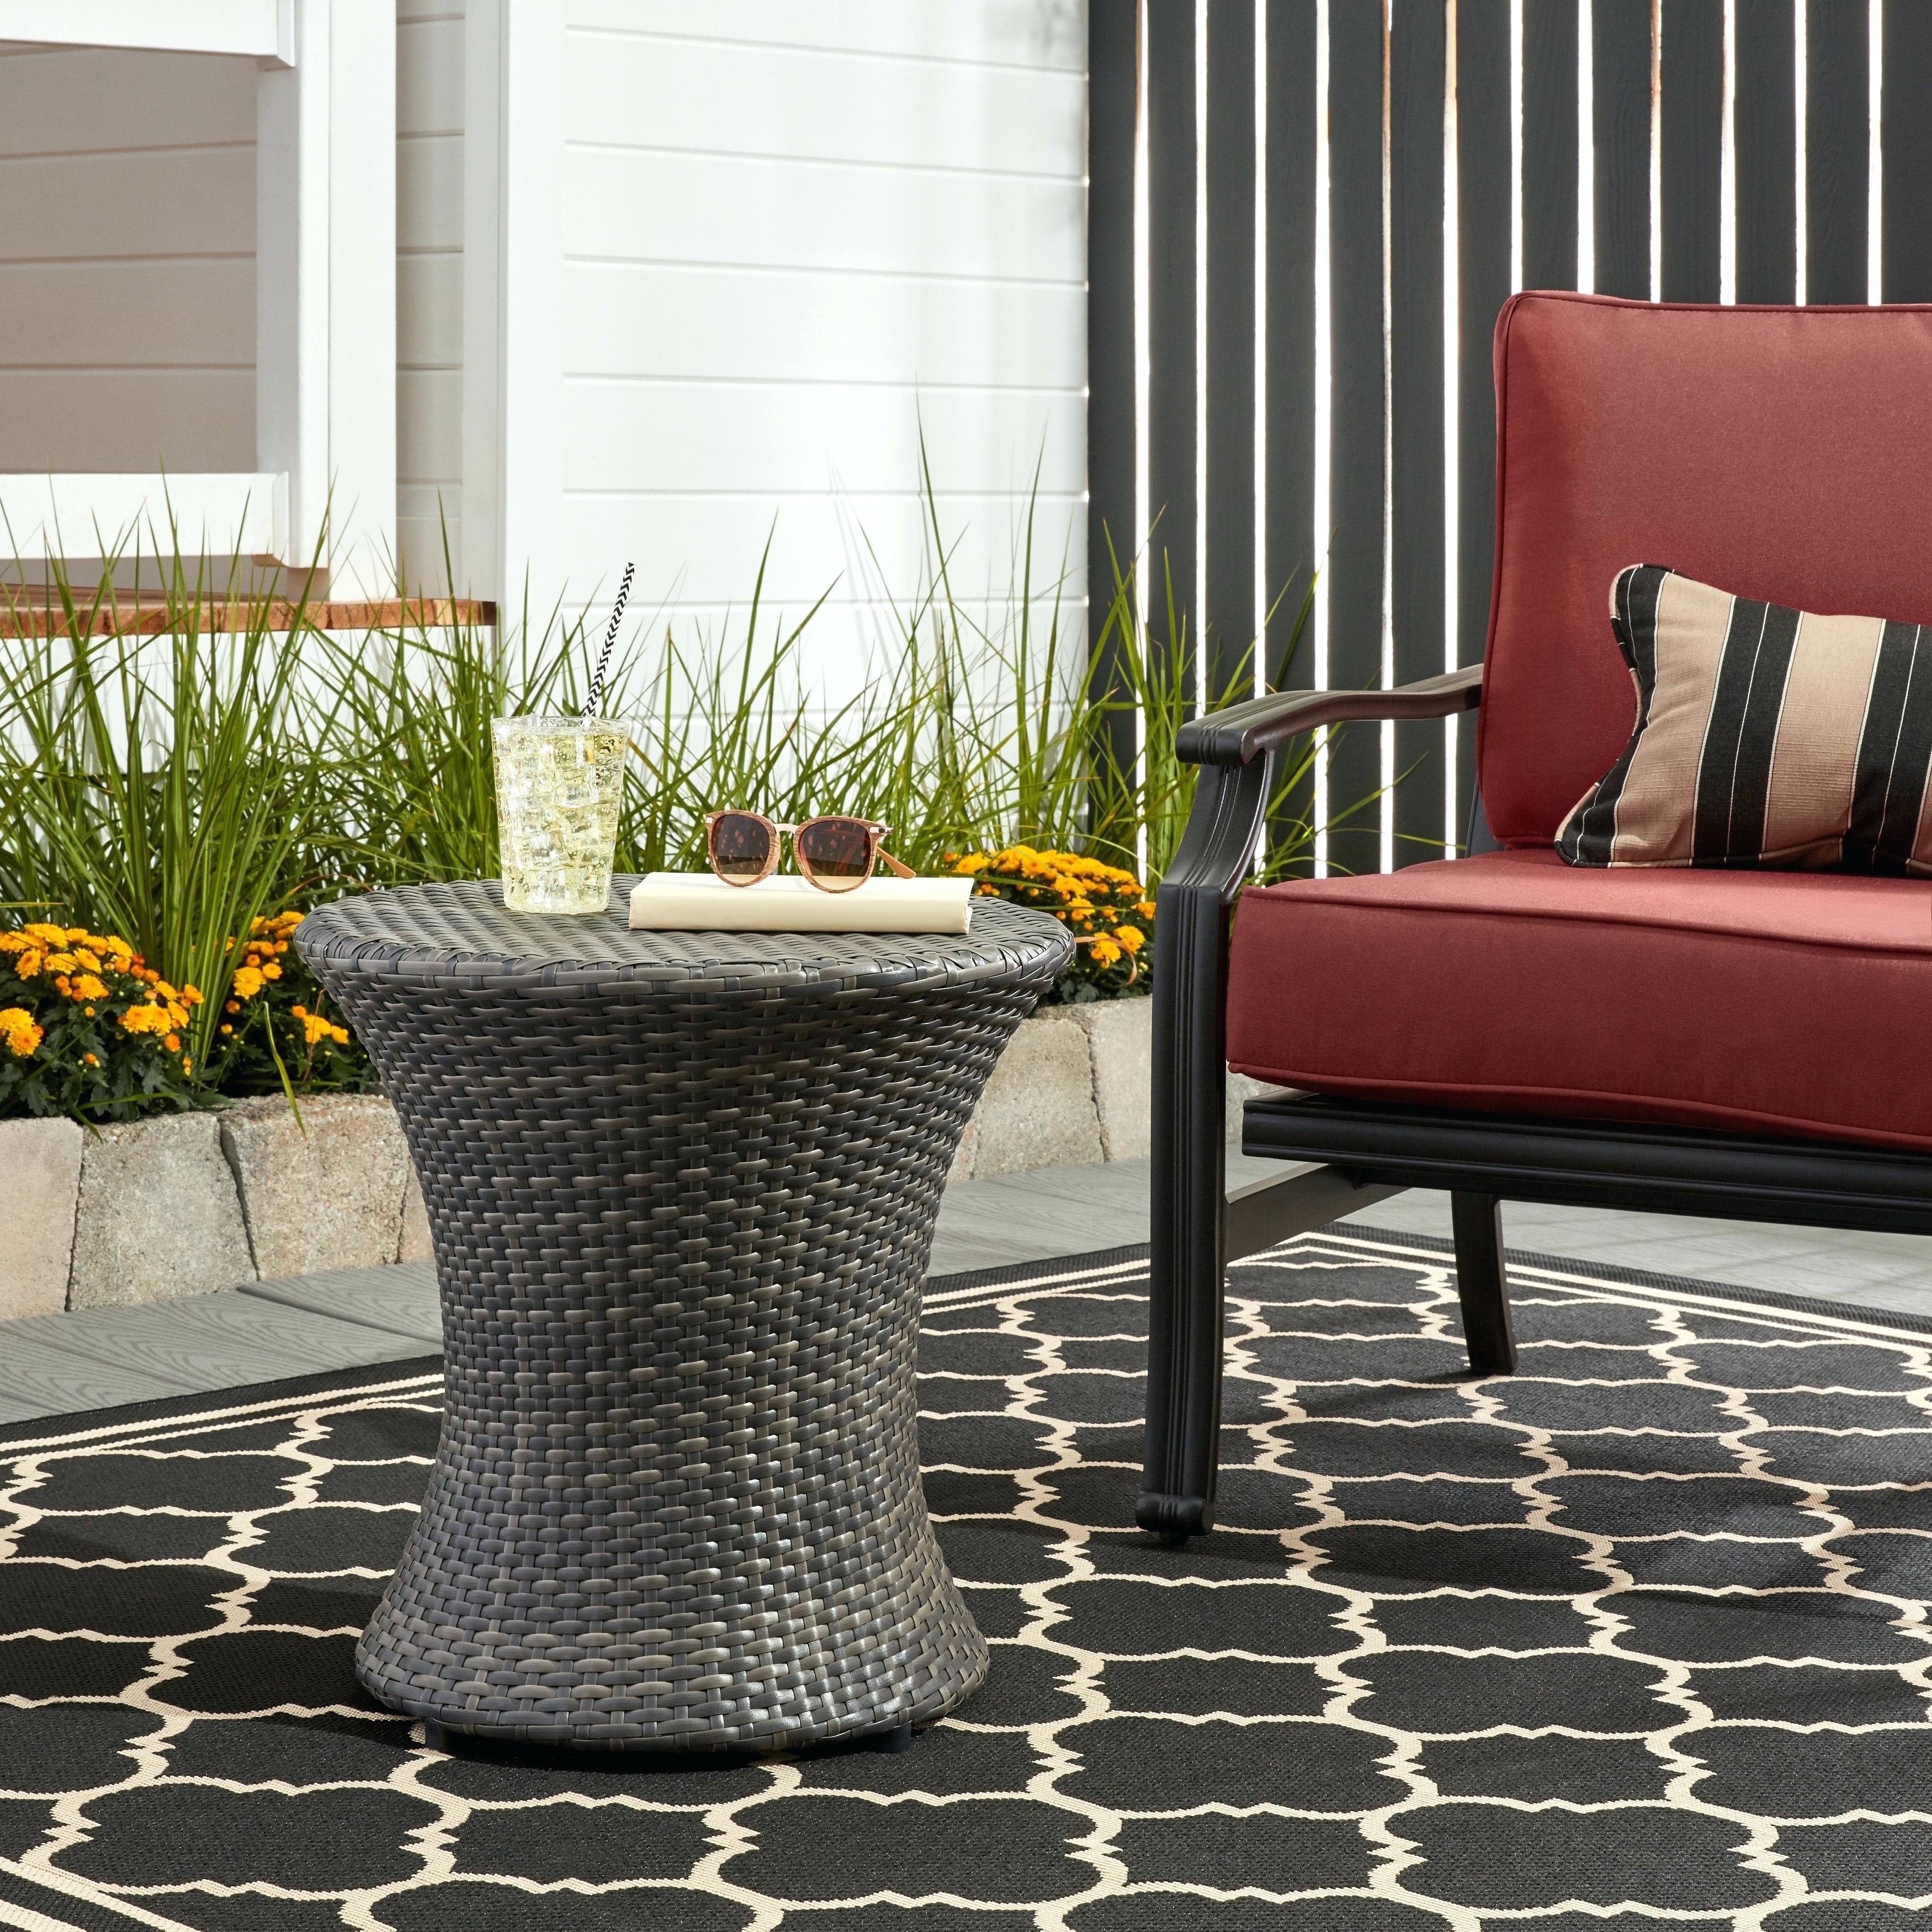 outdoor side table res diy plans mosaic tile wicker with umbrella white metal storage target hole pier one dining chairs clearance hairpin leg desk ballards rugs barn style coffee